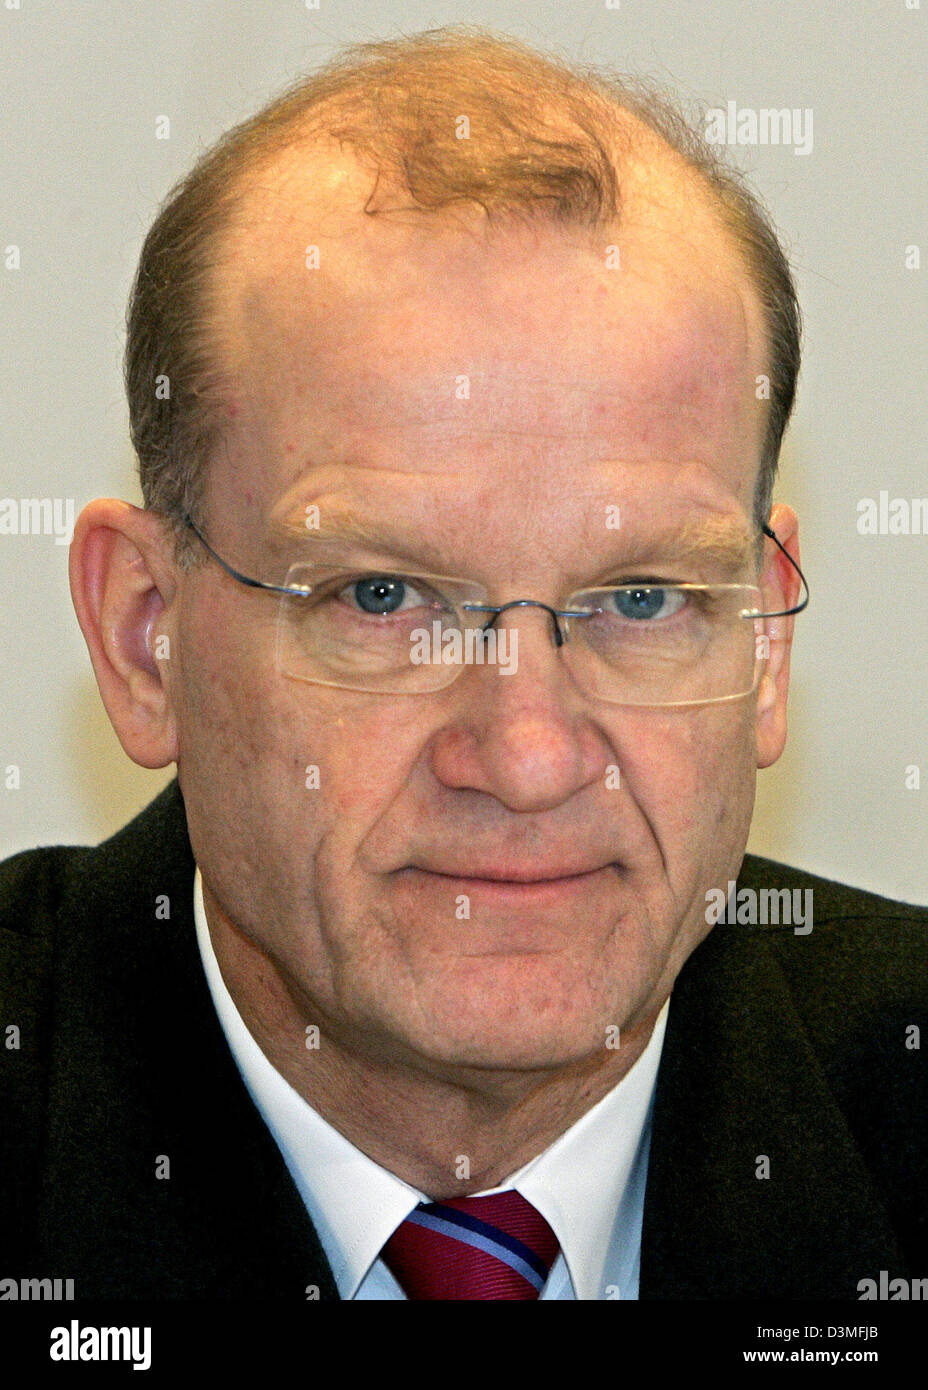 Manfred Spindler, the new board member of German chemical group Degussa AG, pictured during a press conference in Duesseldorf, Germany, Friday, 03 March 2006. Photo: Roland Weihrauch Stock Photo